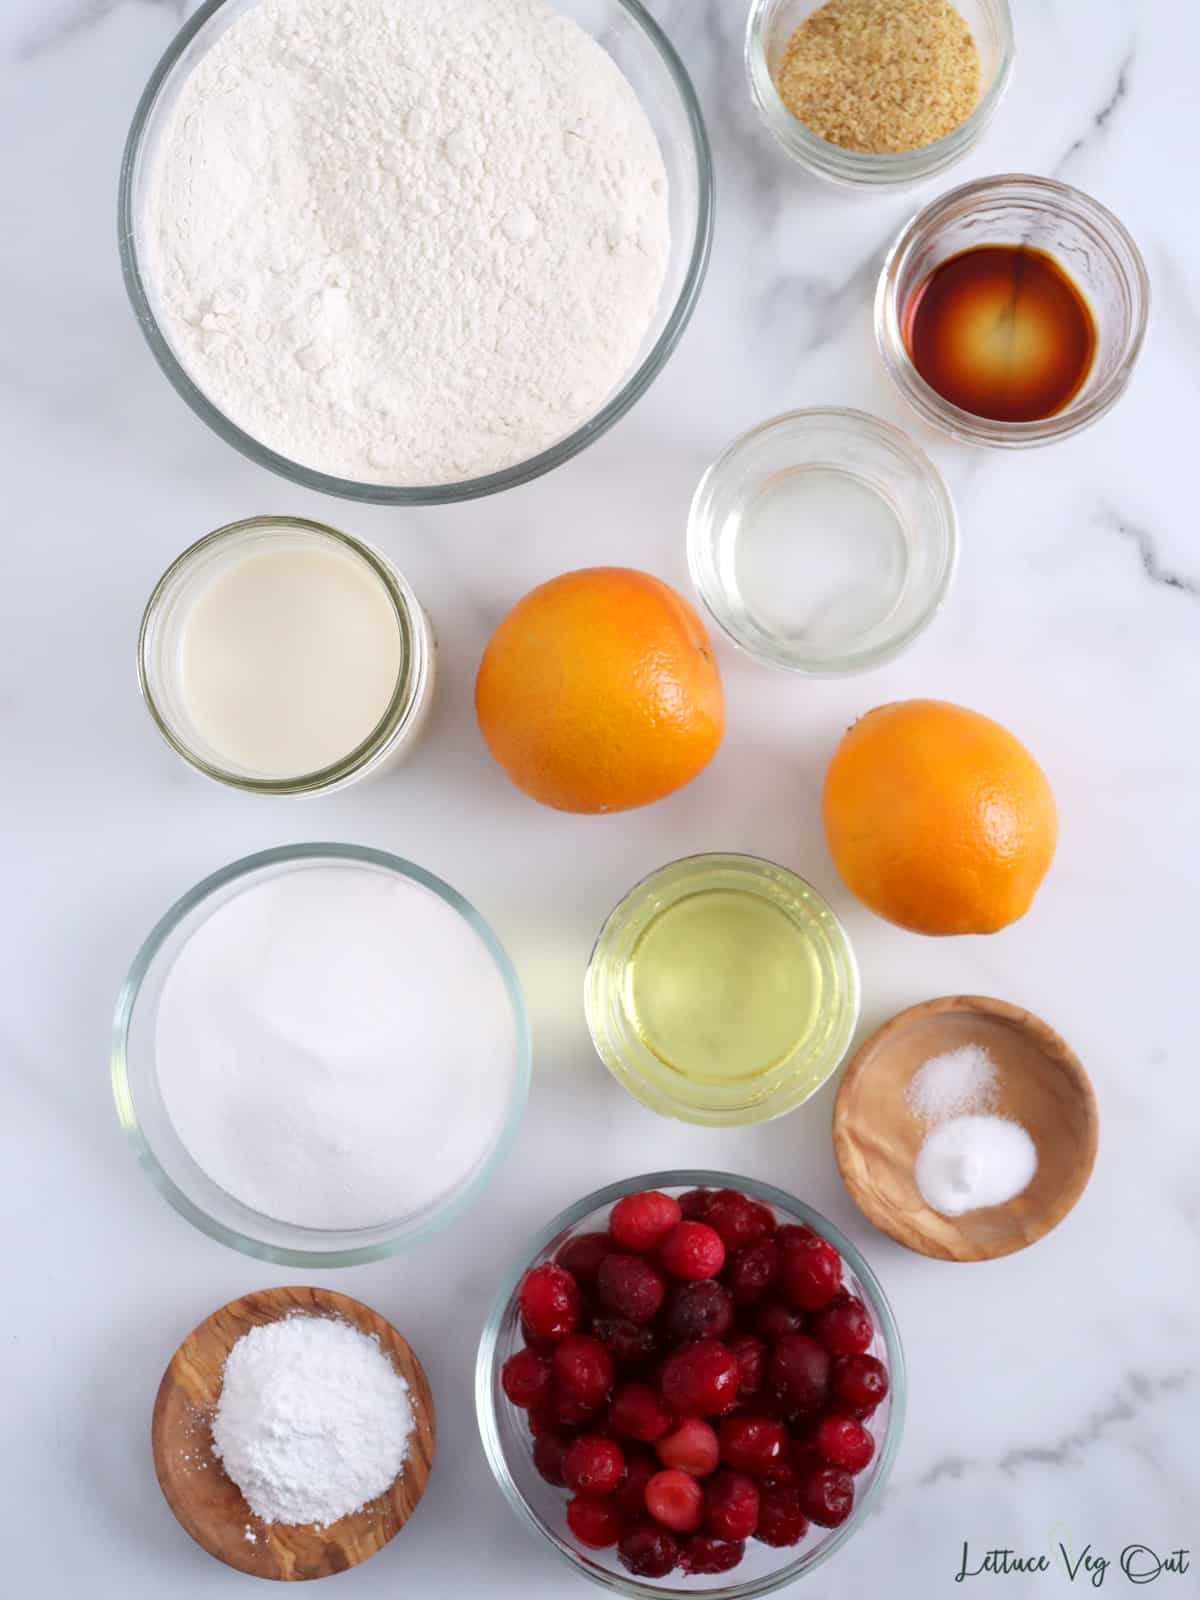 Small bowls with ingredients for cranberry orange muffins.